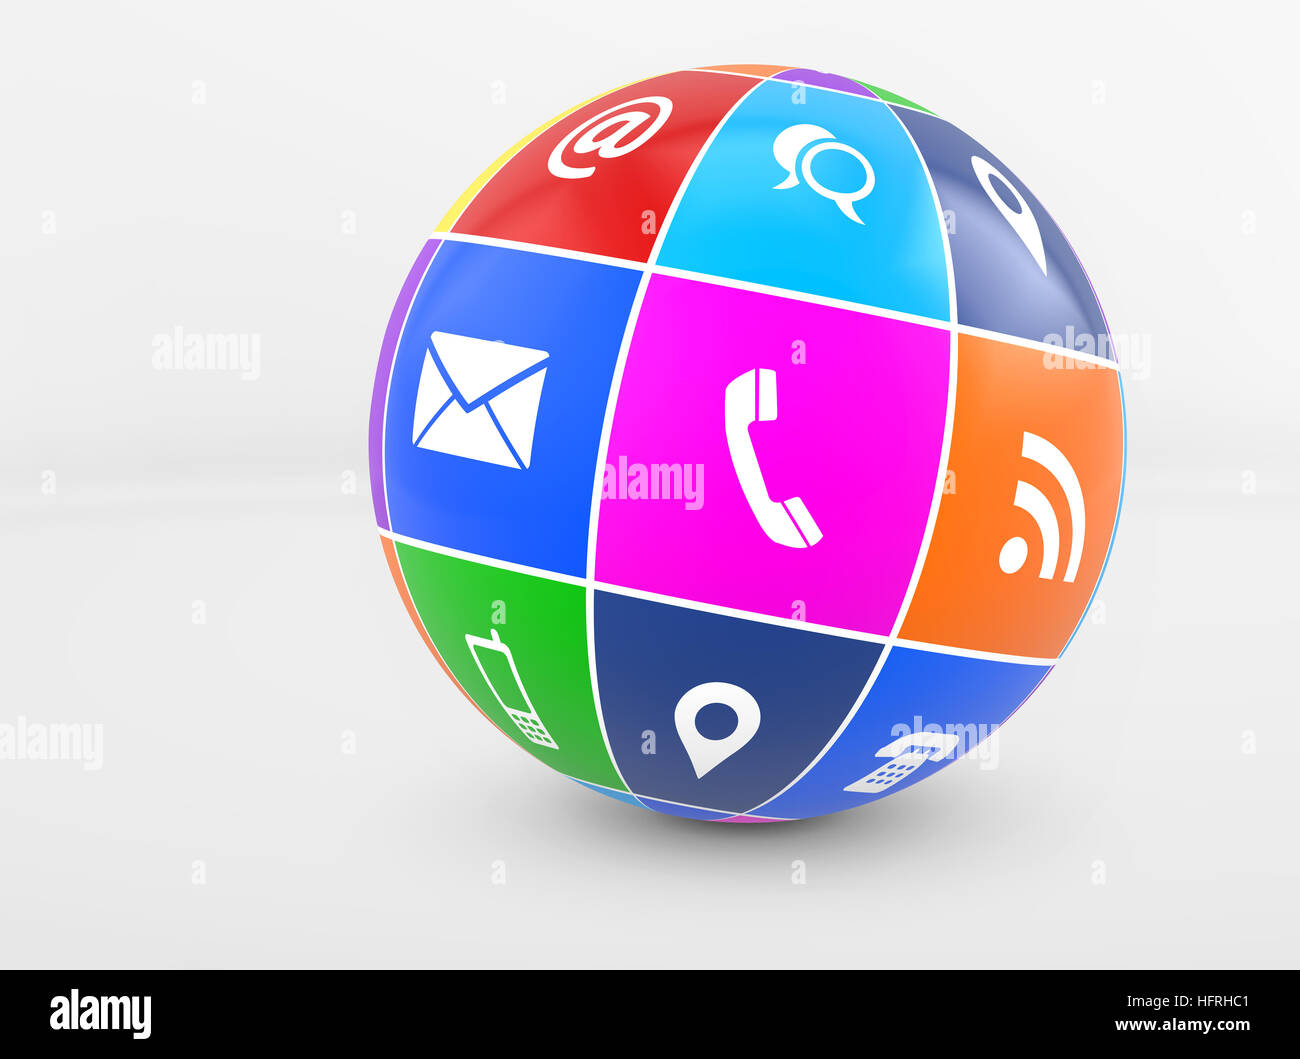 contact-us-web-icons-and-online-connection-symbols-on-a-globe-stock-photo-alamy